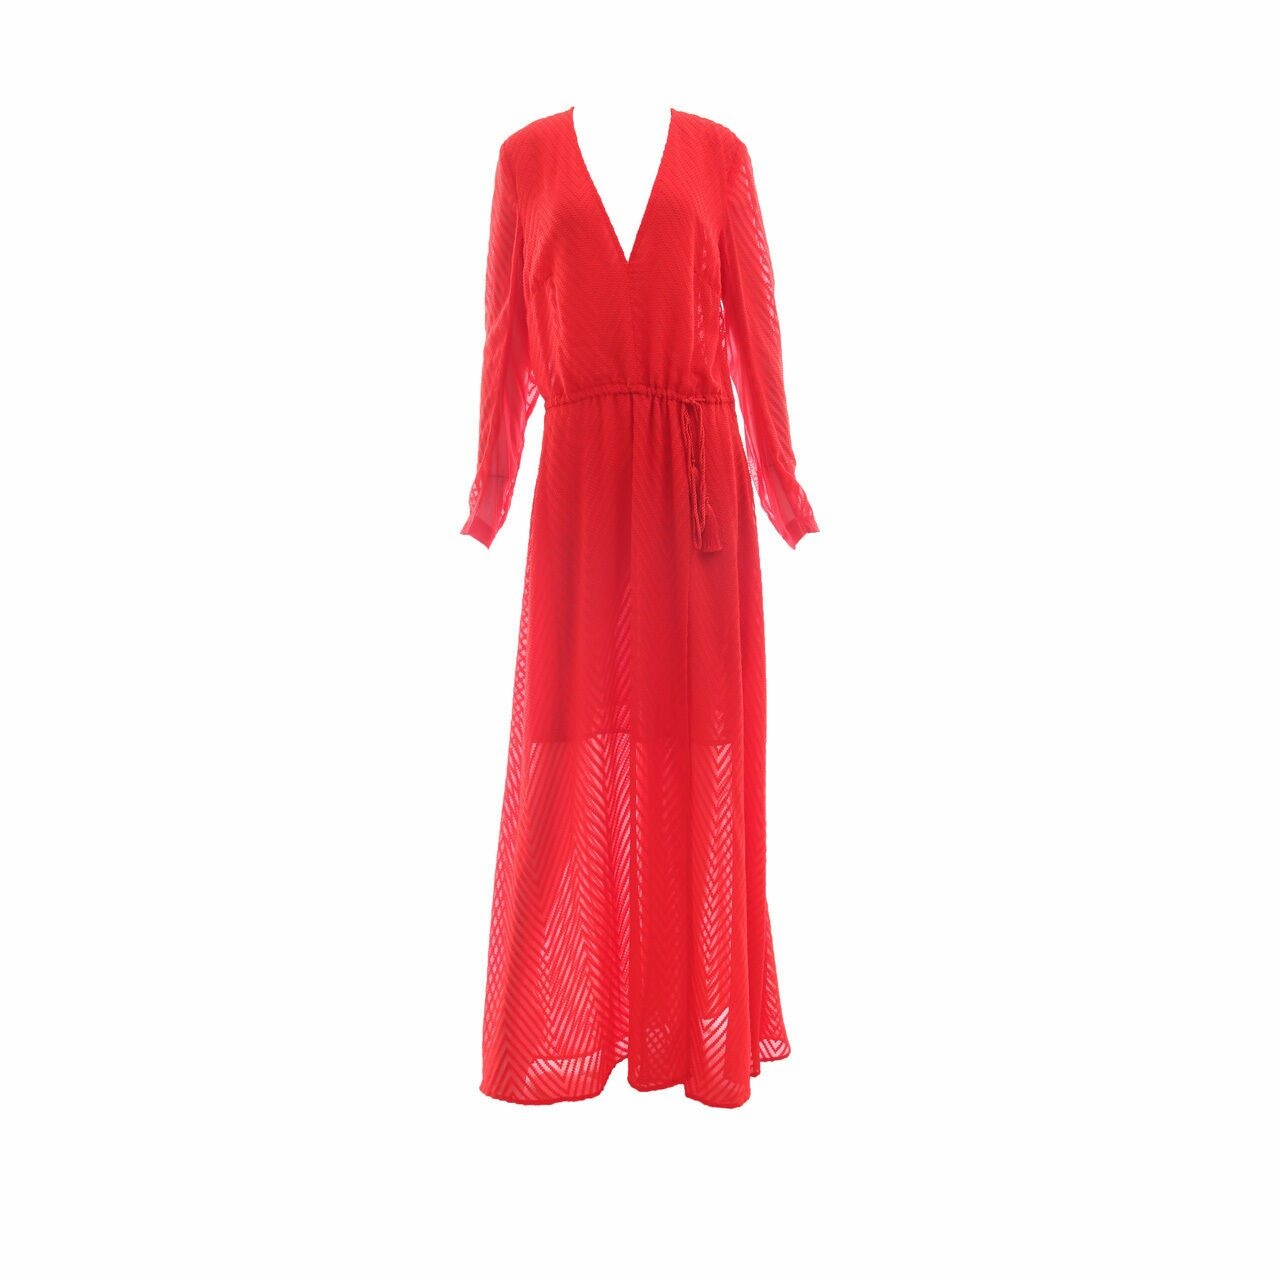 H&M Red Patterned Long Dress